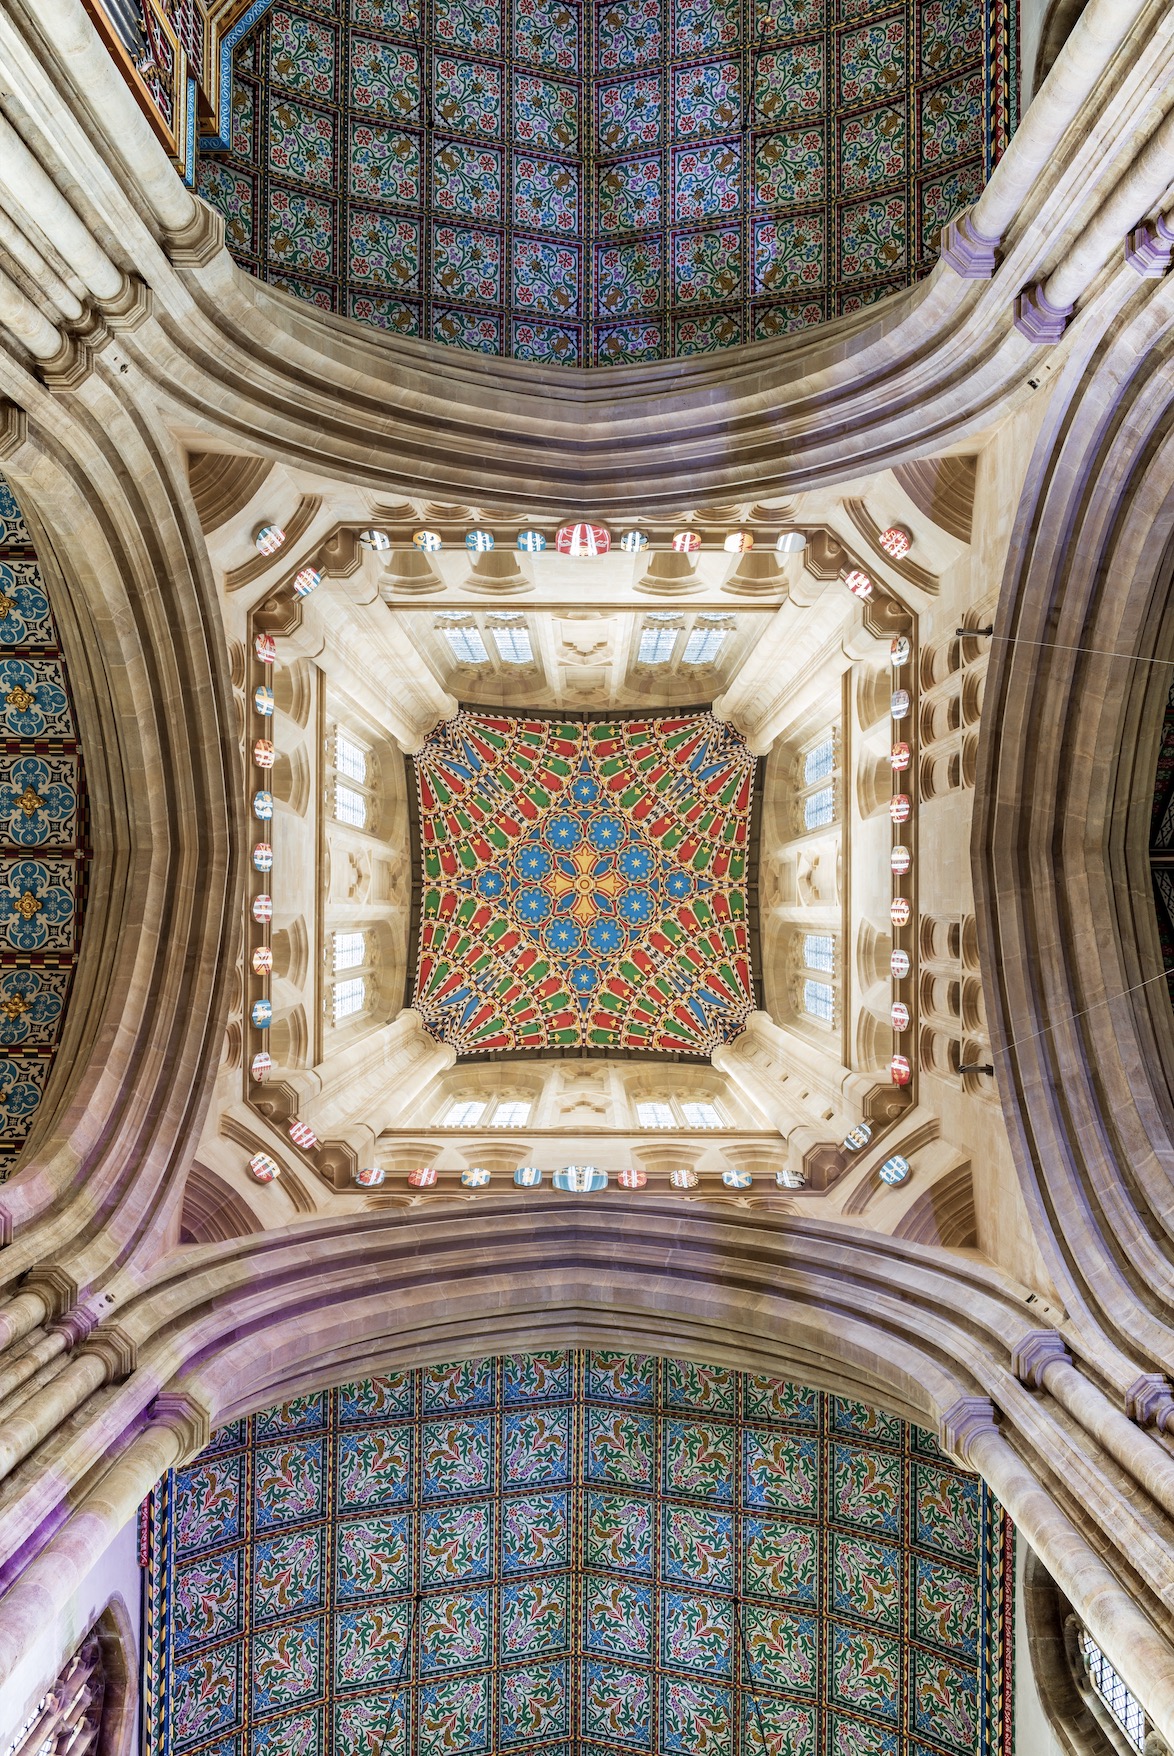 St Edmundsbury Cathedral Ceiling - Always Look Up